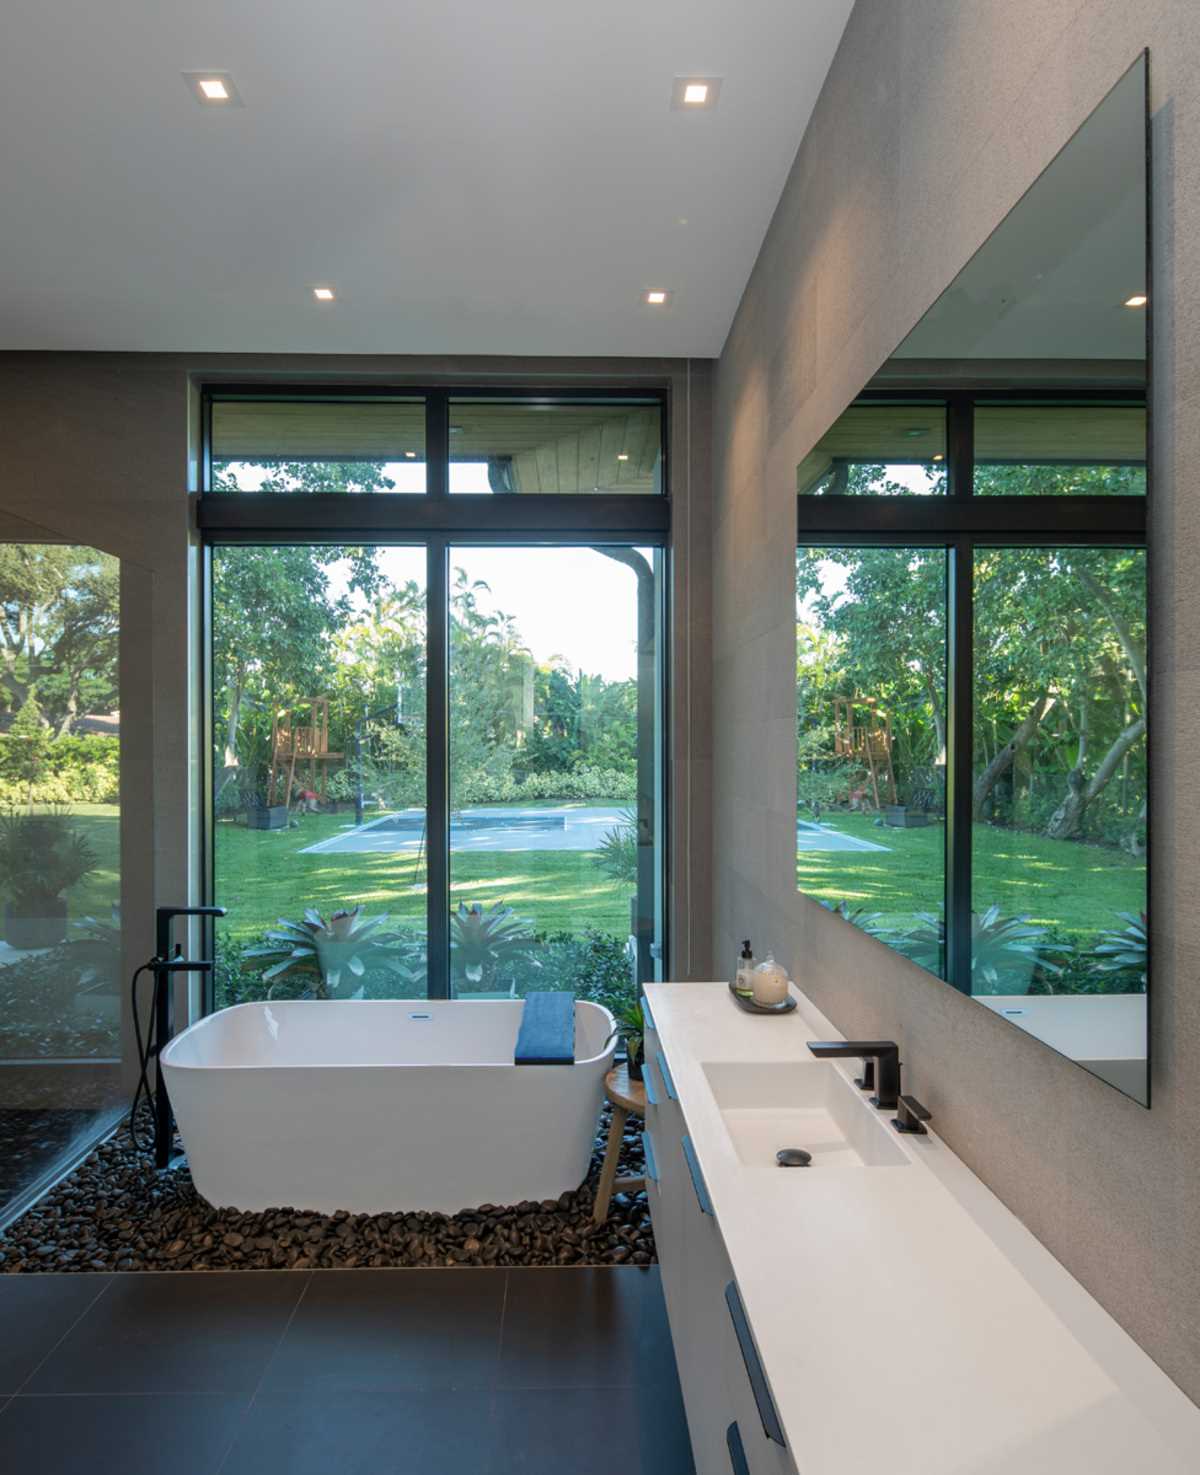 A contemporary bathroom that includes pebbles underneath the freestanding bathtub.